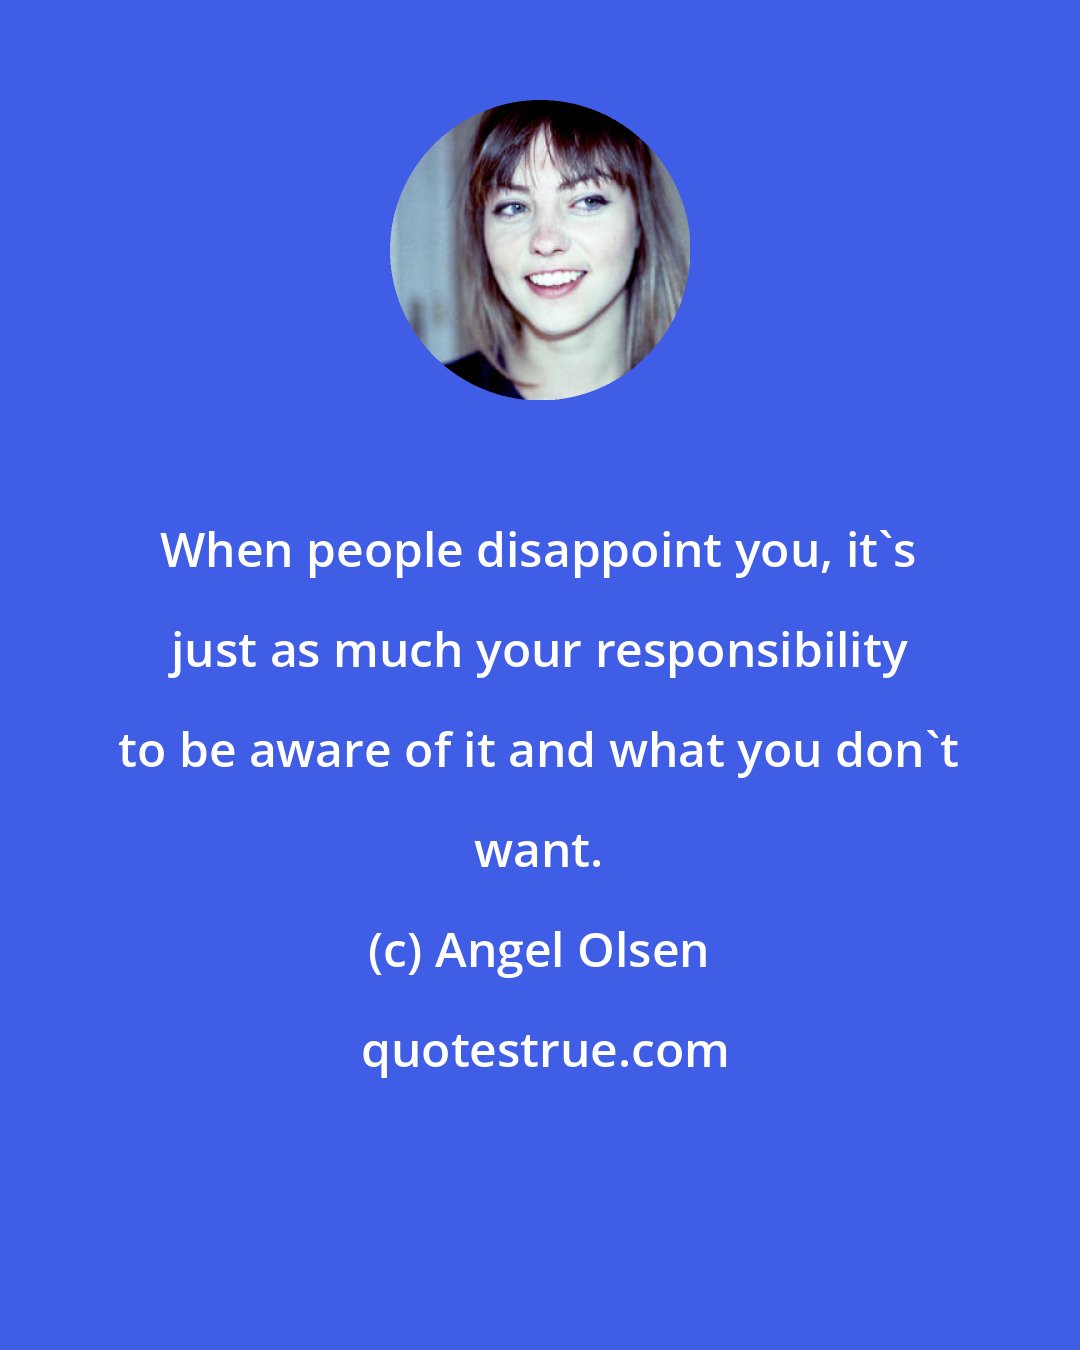 Angel Olsen: When people disappoint you, it's just as much your responsibility to be aware of it and what you don't want.